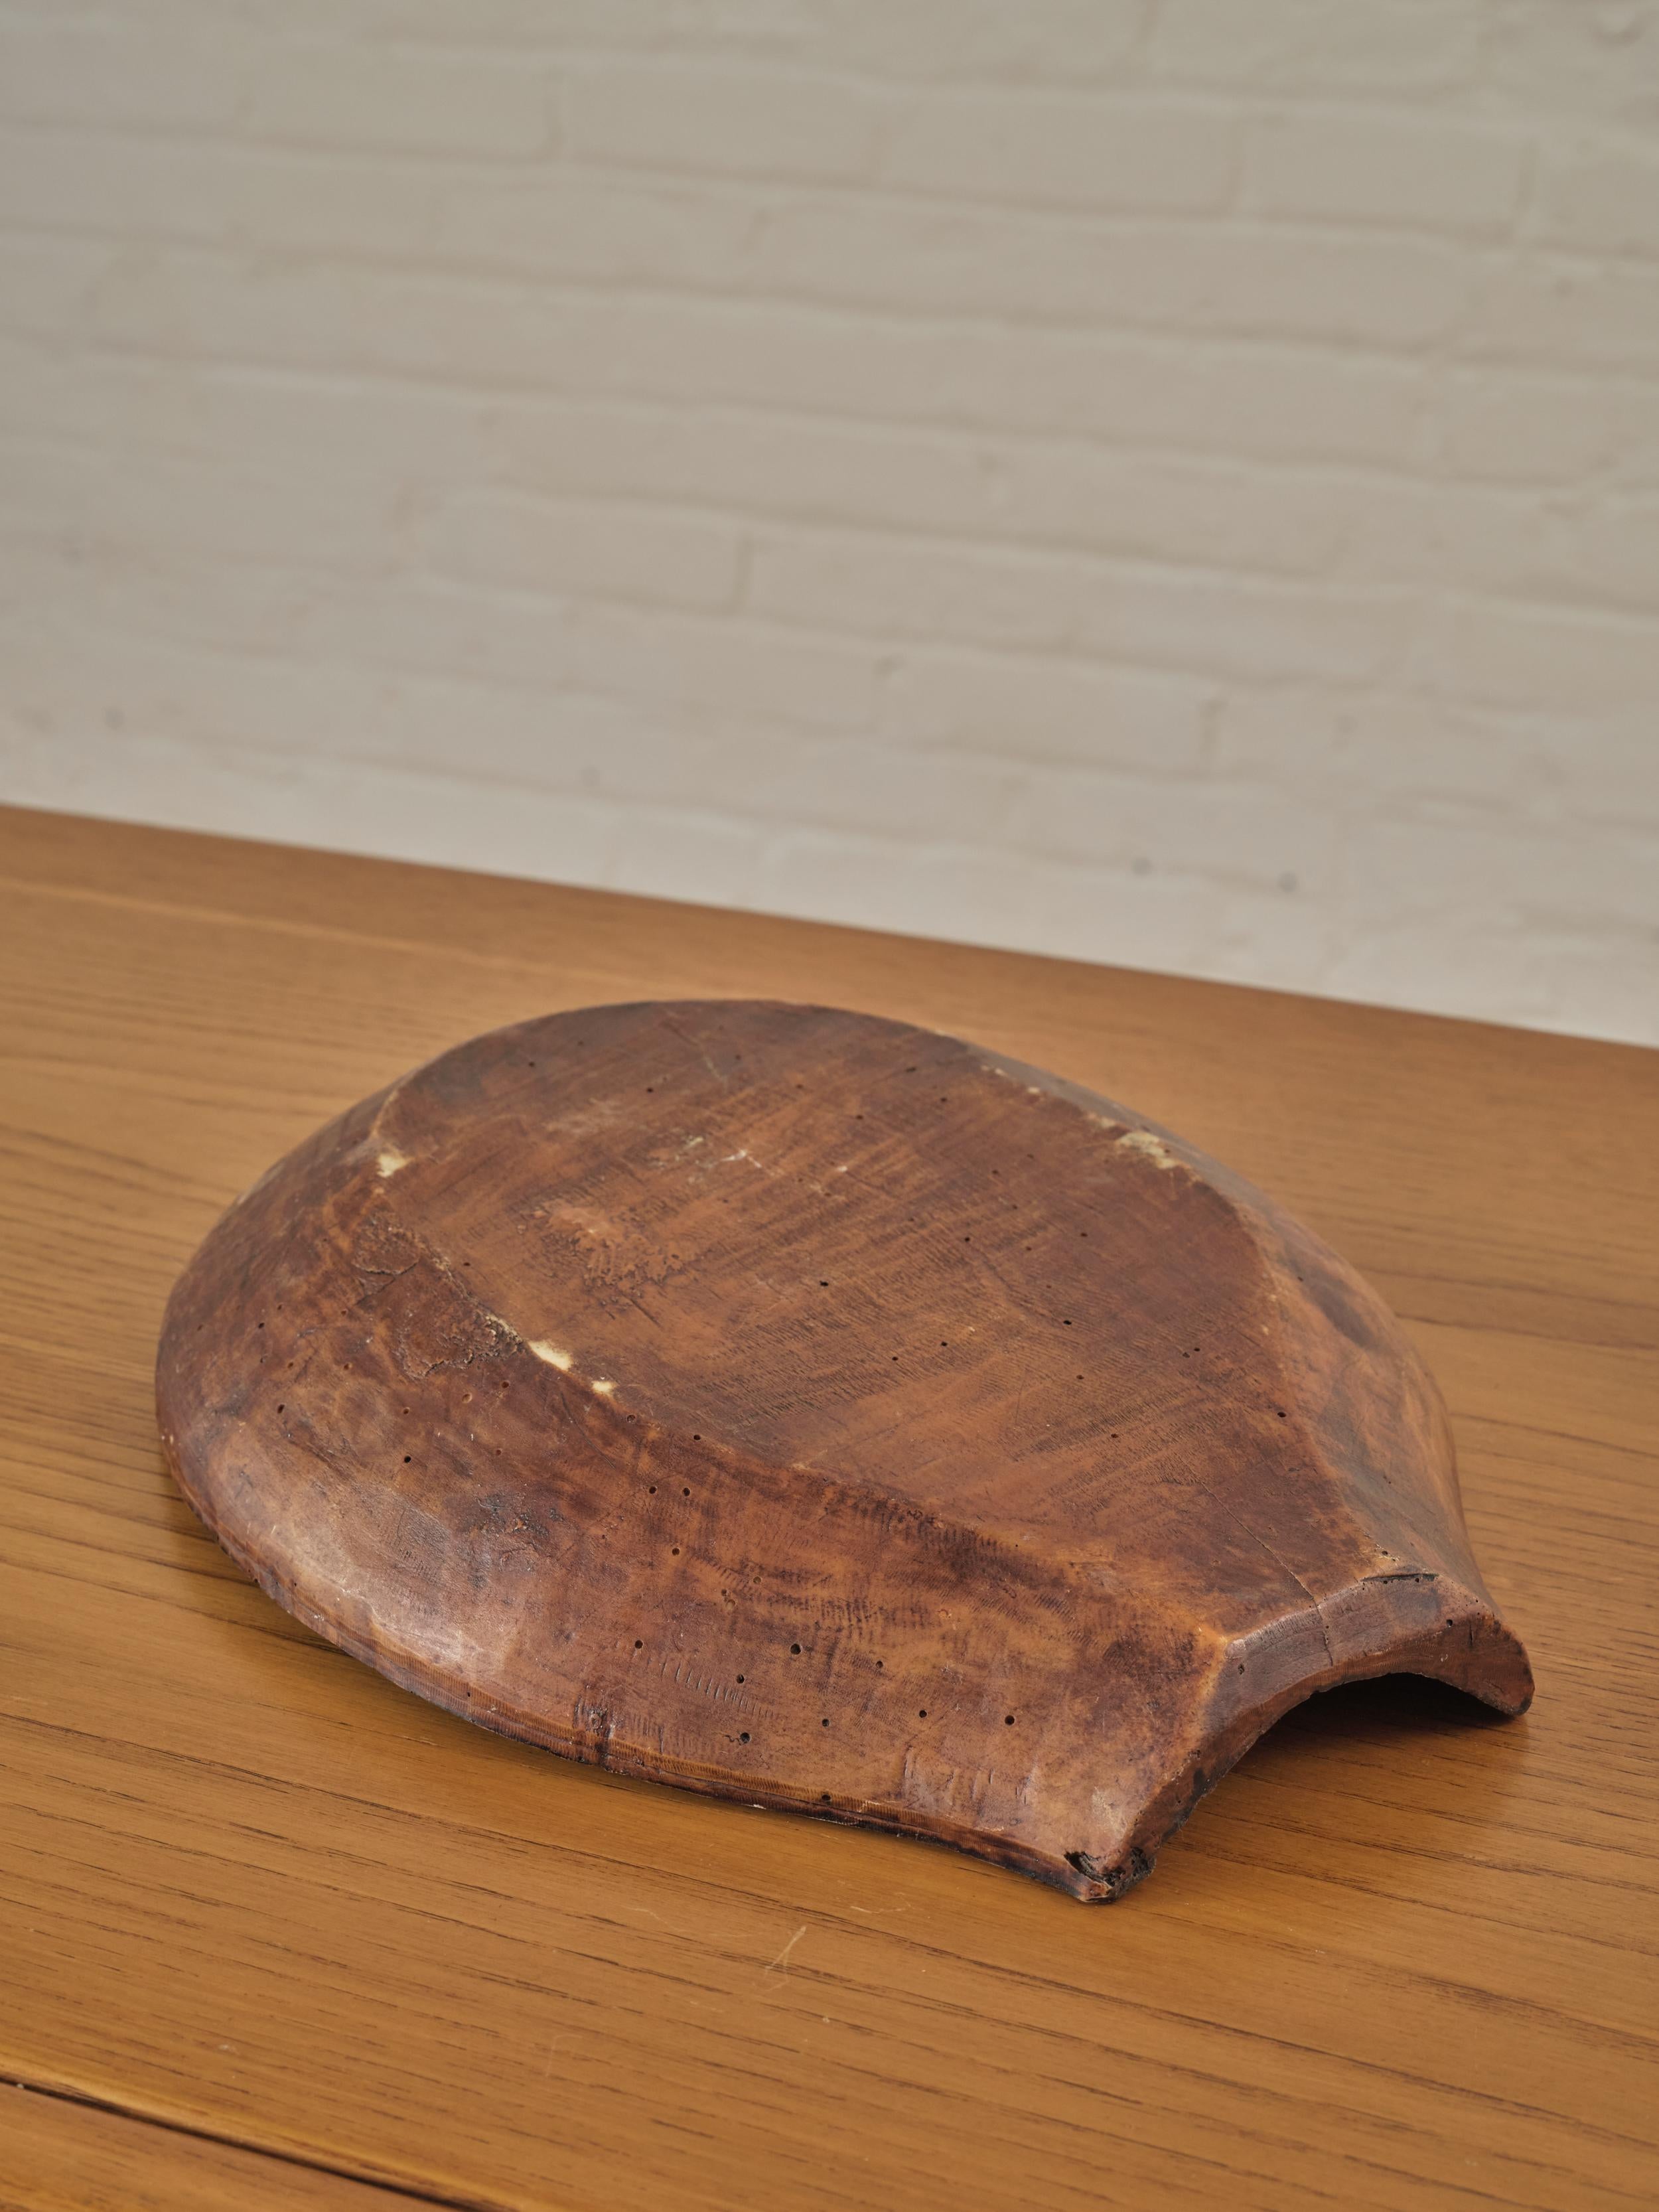 A small African wooden dough bowl with a flat opening on one side.

